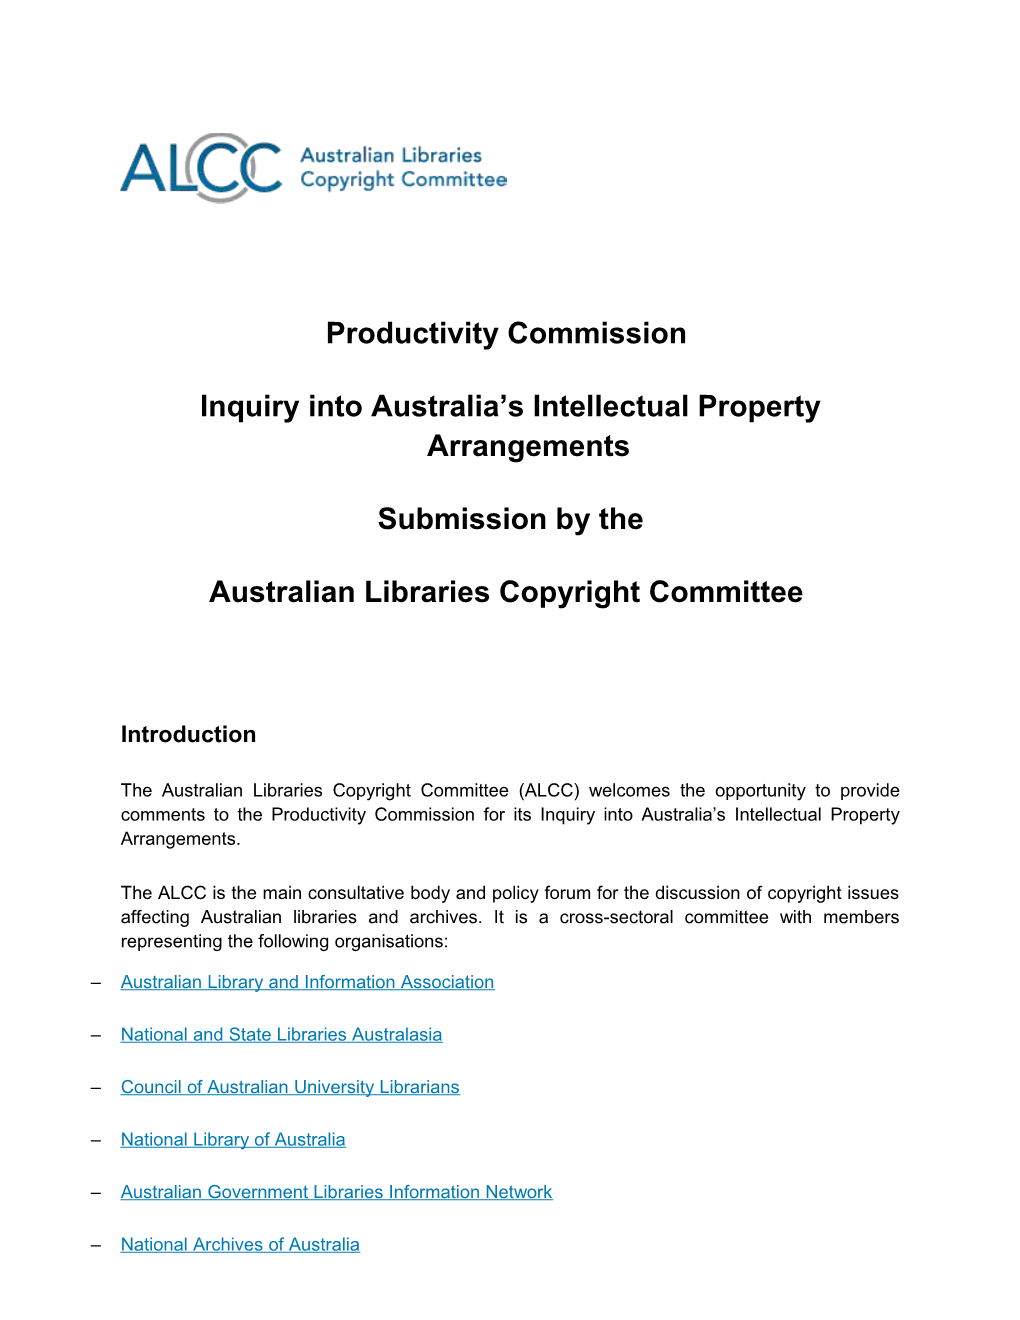 Submission 125 - Australian Libraries Copyright Committee - Intellectual Property Arrangements